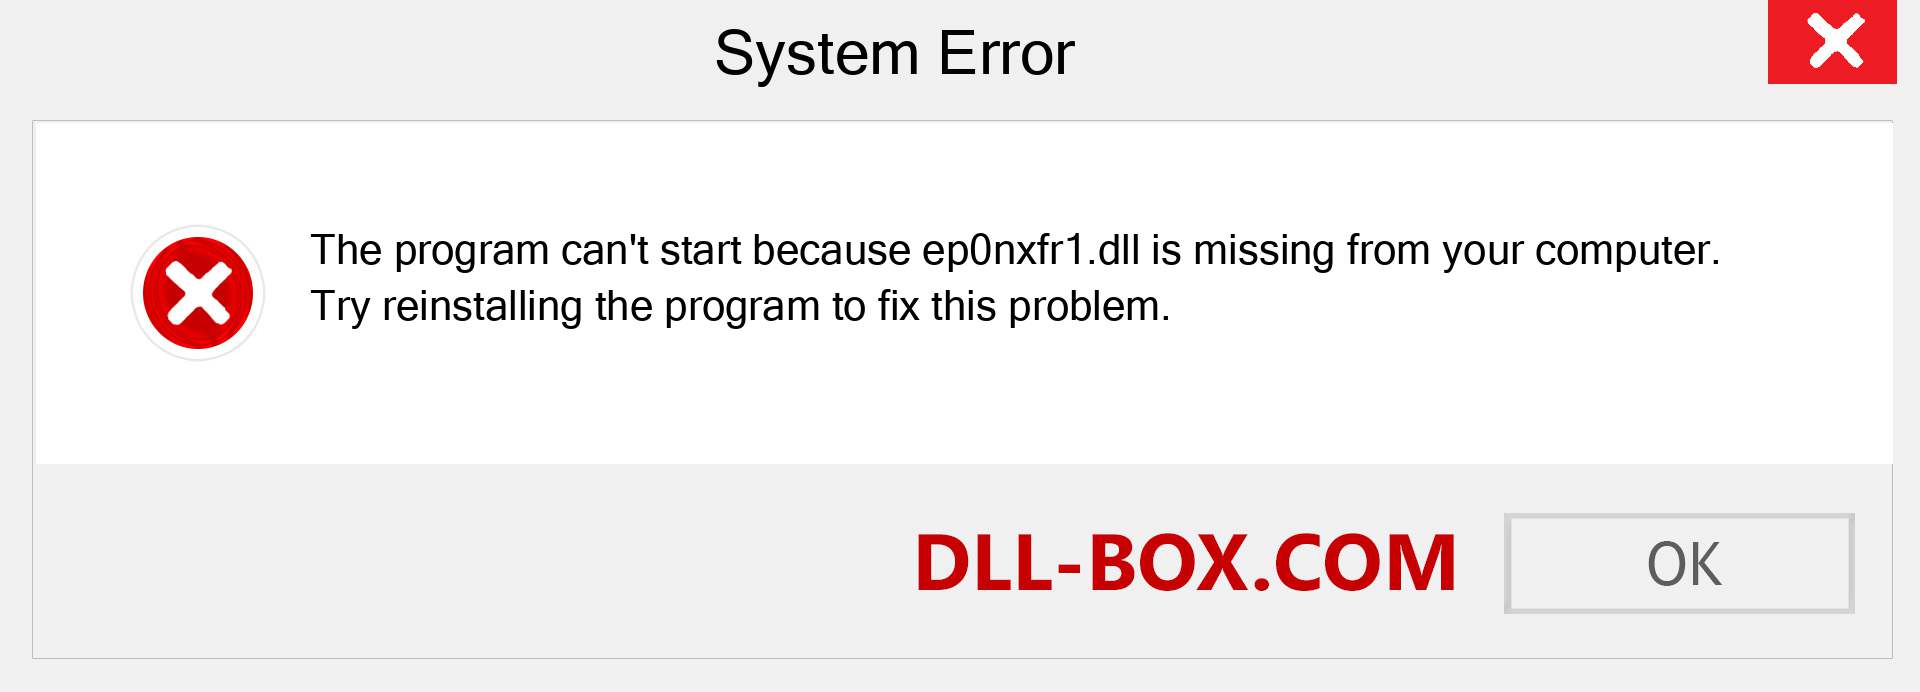  ep0nxfr1.dll file is missing?. Download for Windows 7, 8, 10 - Fix  ep0nxfr1 dll Missing Error on Windows, photos, images